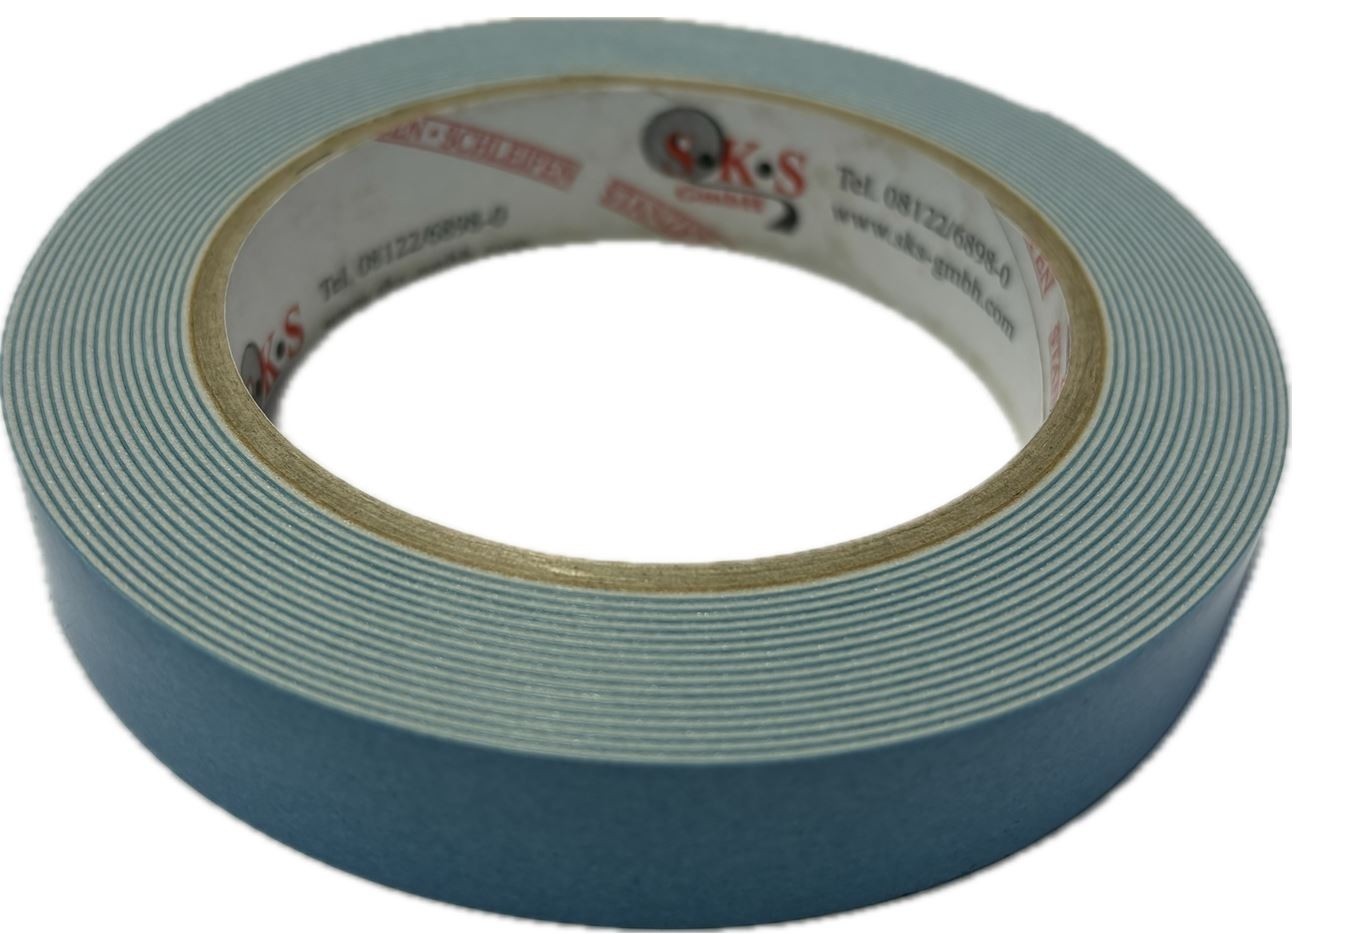 S-K-S 866 Double-sided PE foam adhesive tape with acrylic adhesive, 19 mm x 5 m, 0.8 mm, white